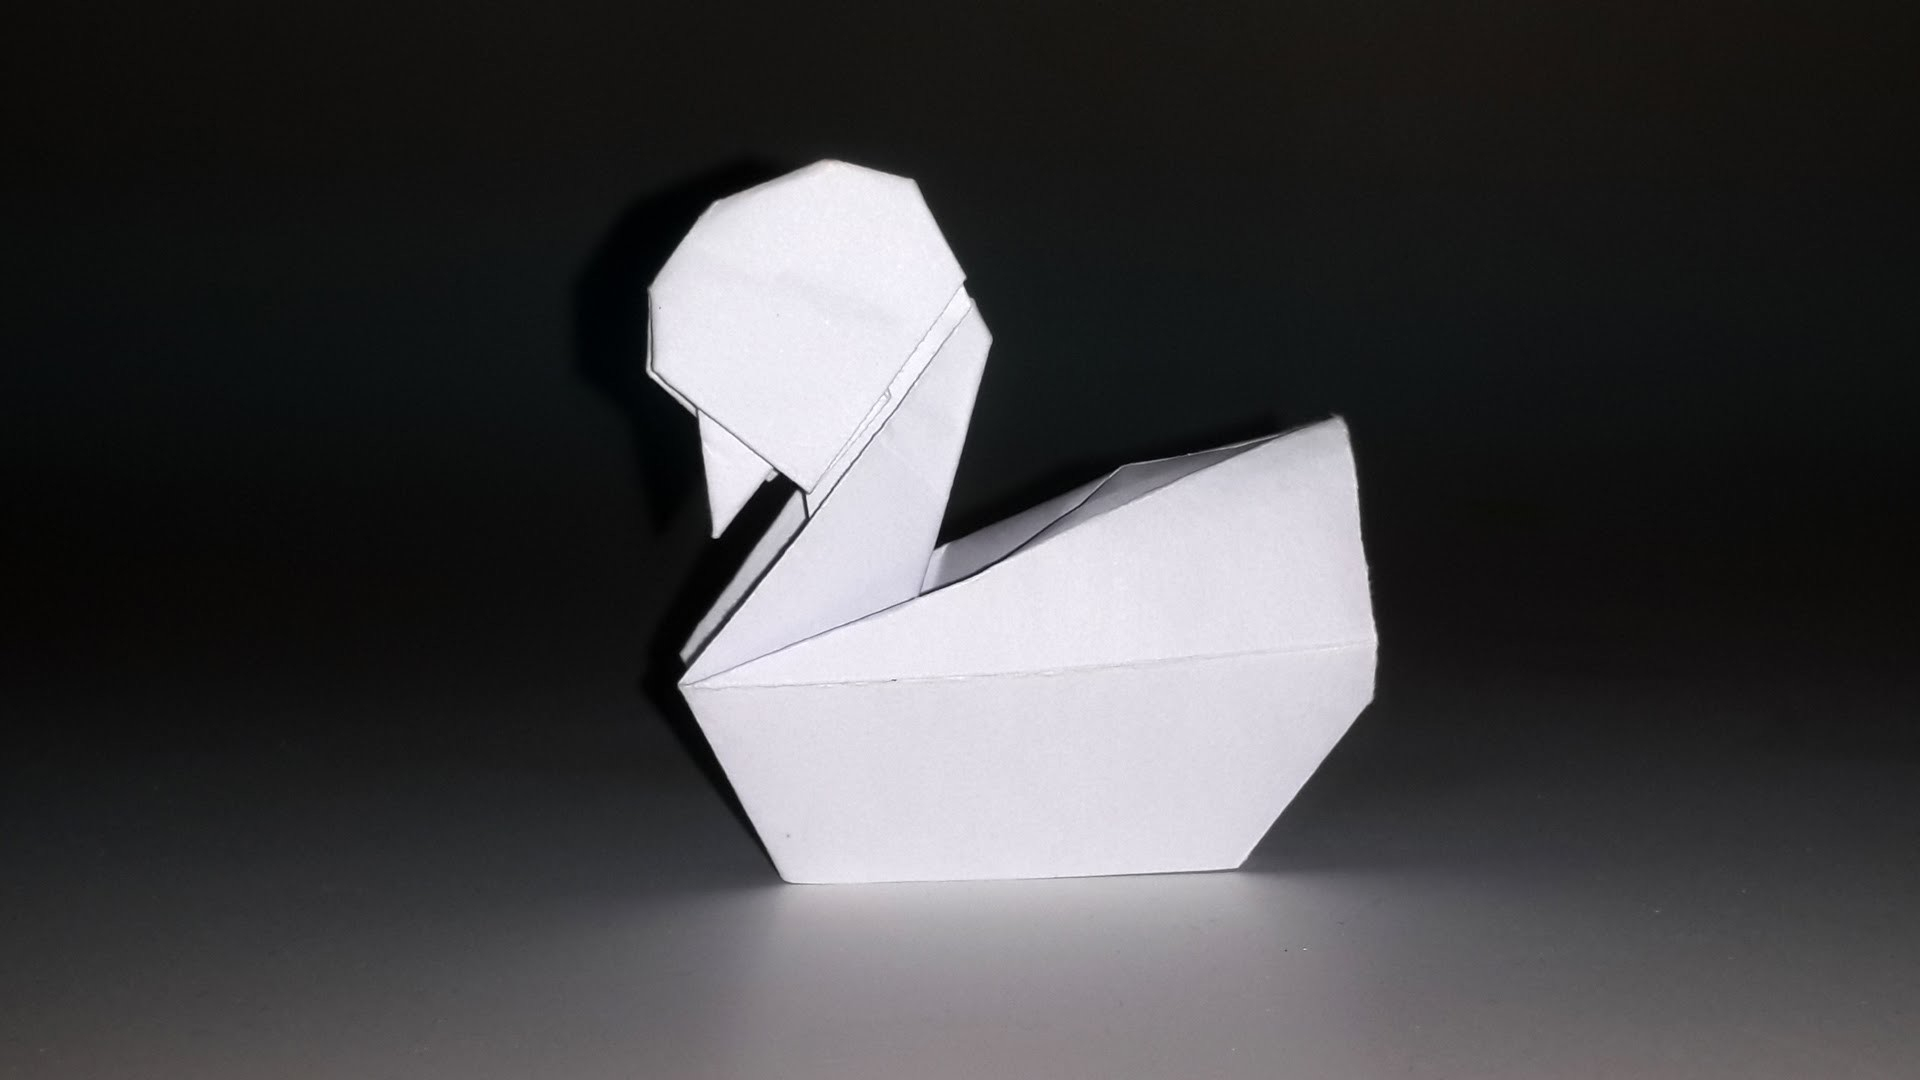 How To Make Origami Duck How To Make A Simple Origami Duck